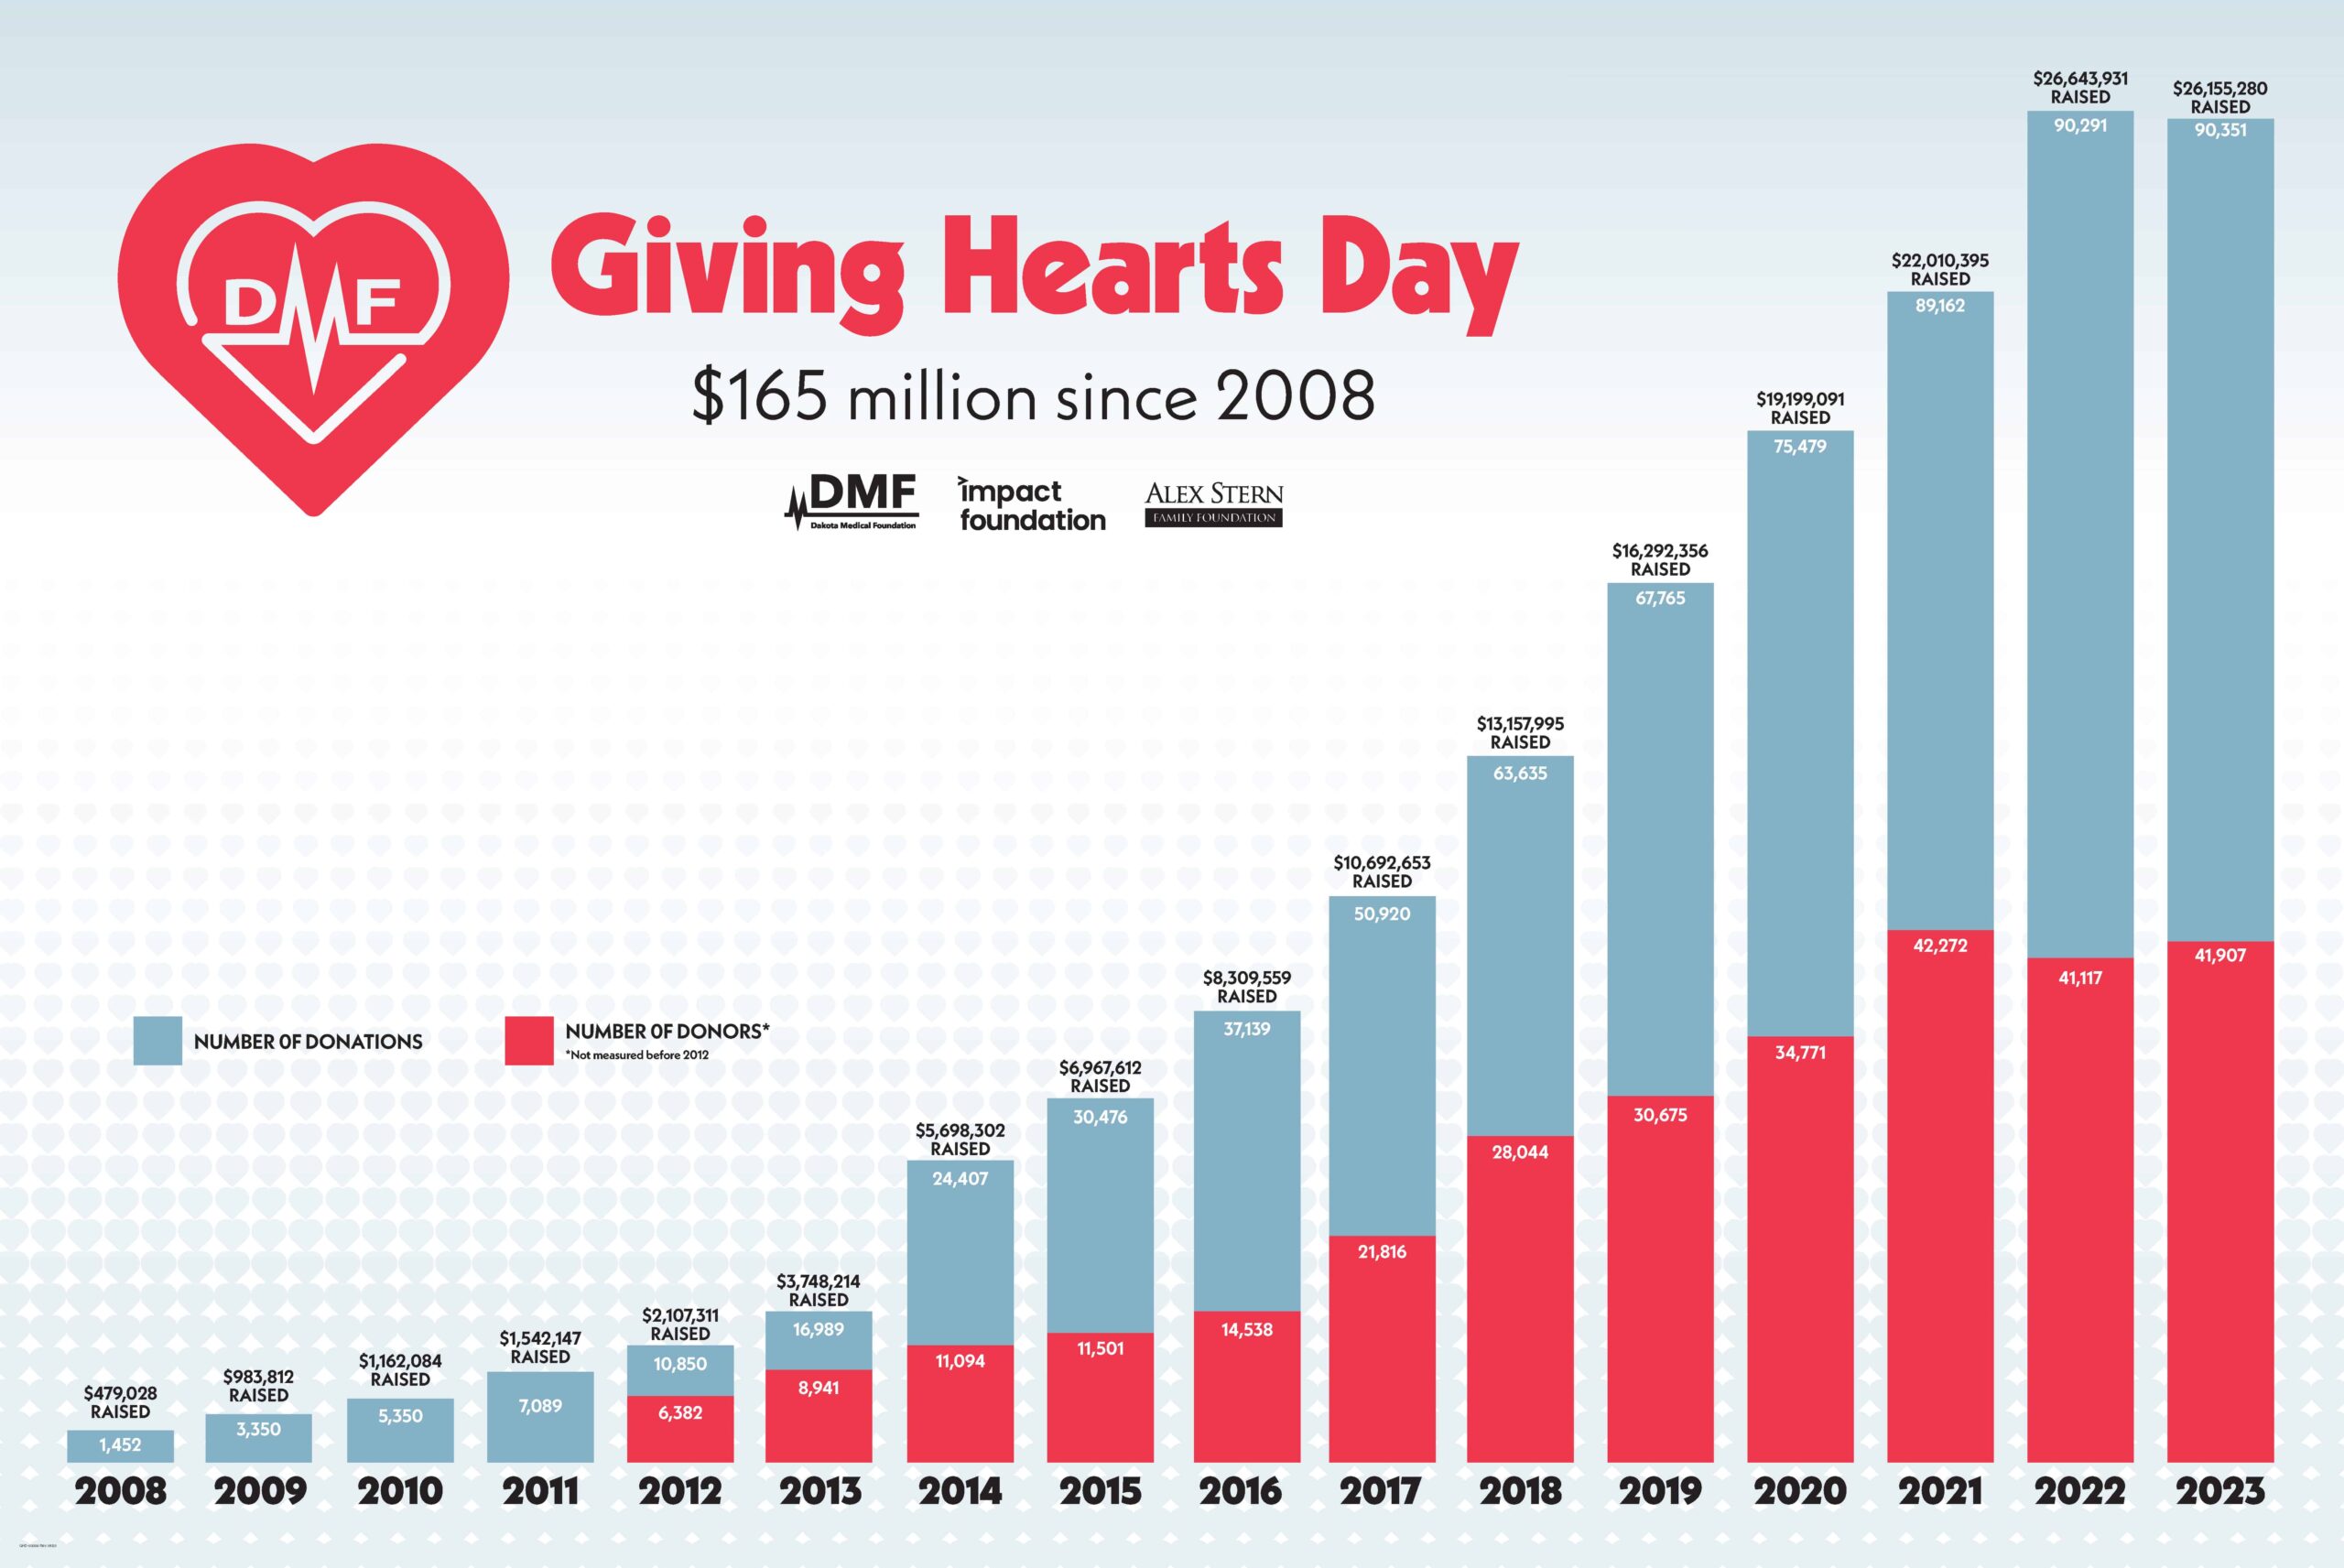 History of Giving Hearts Day